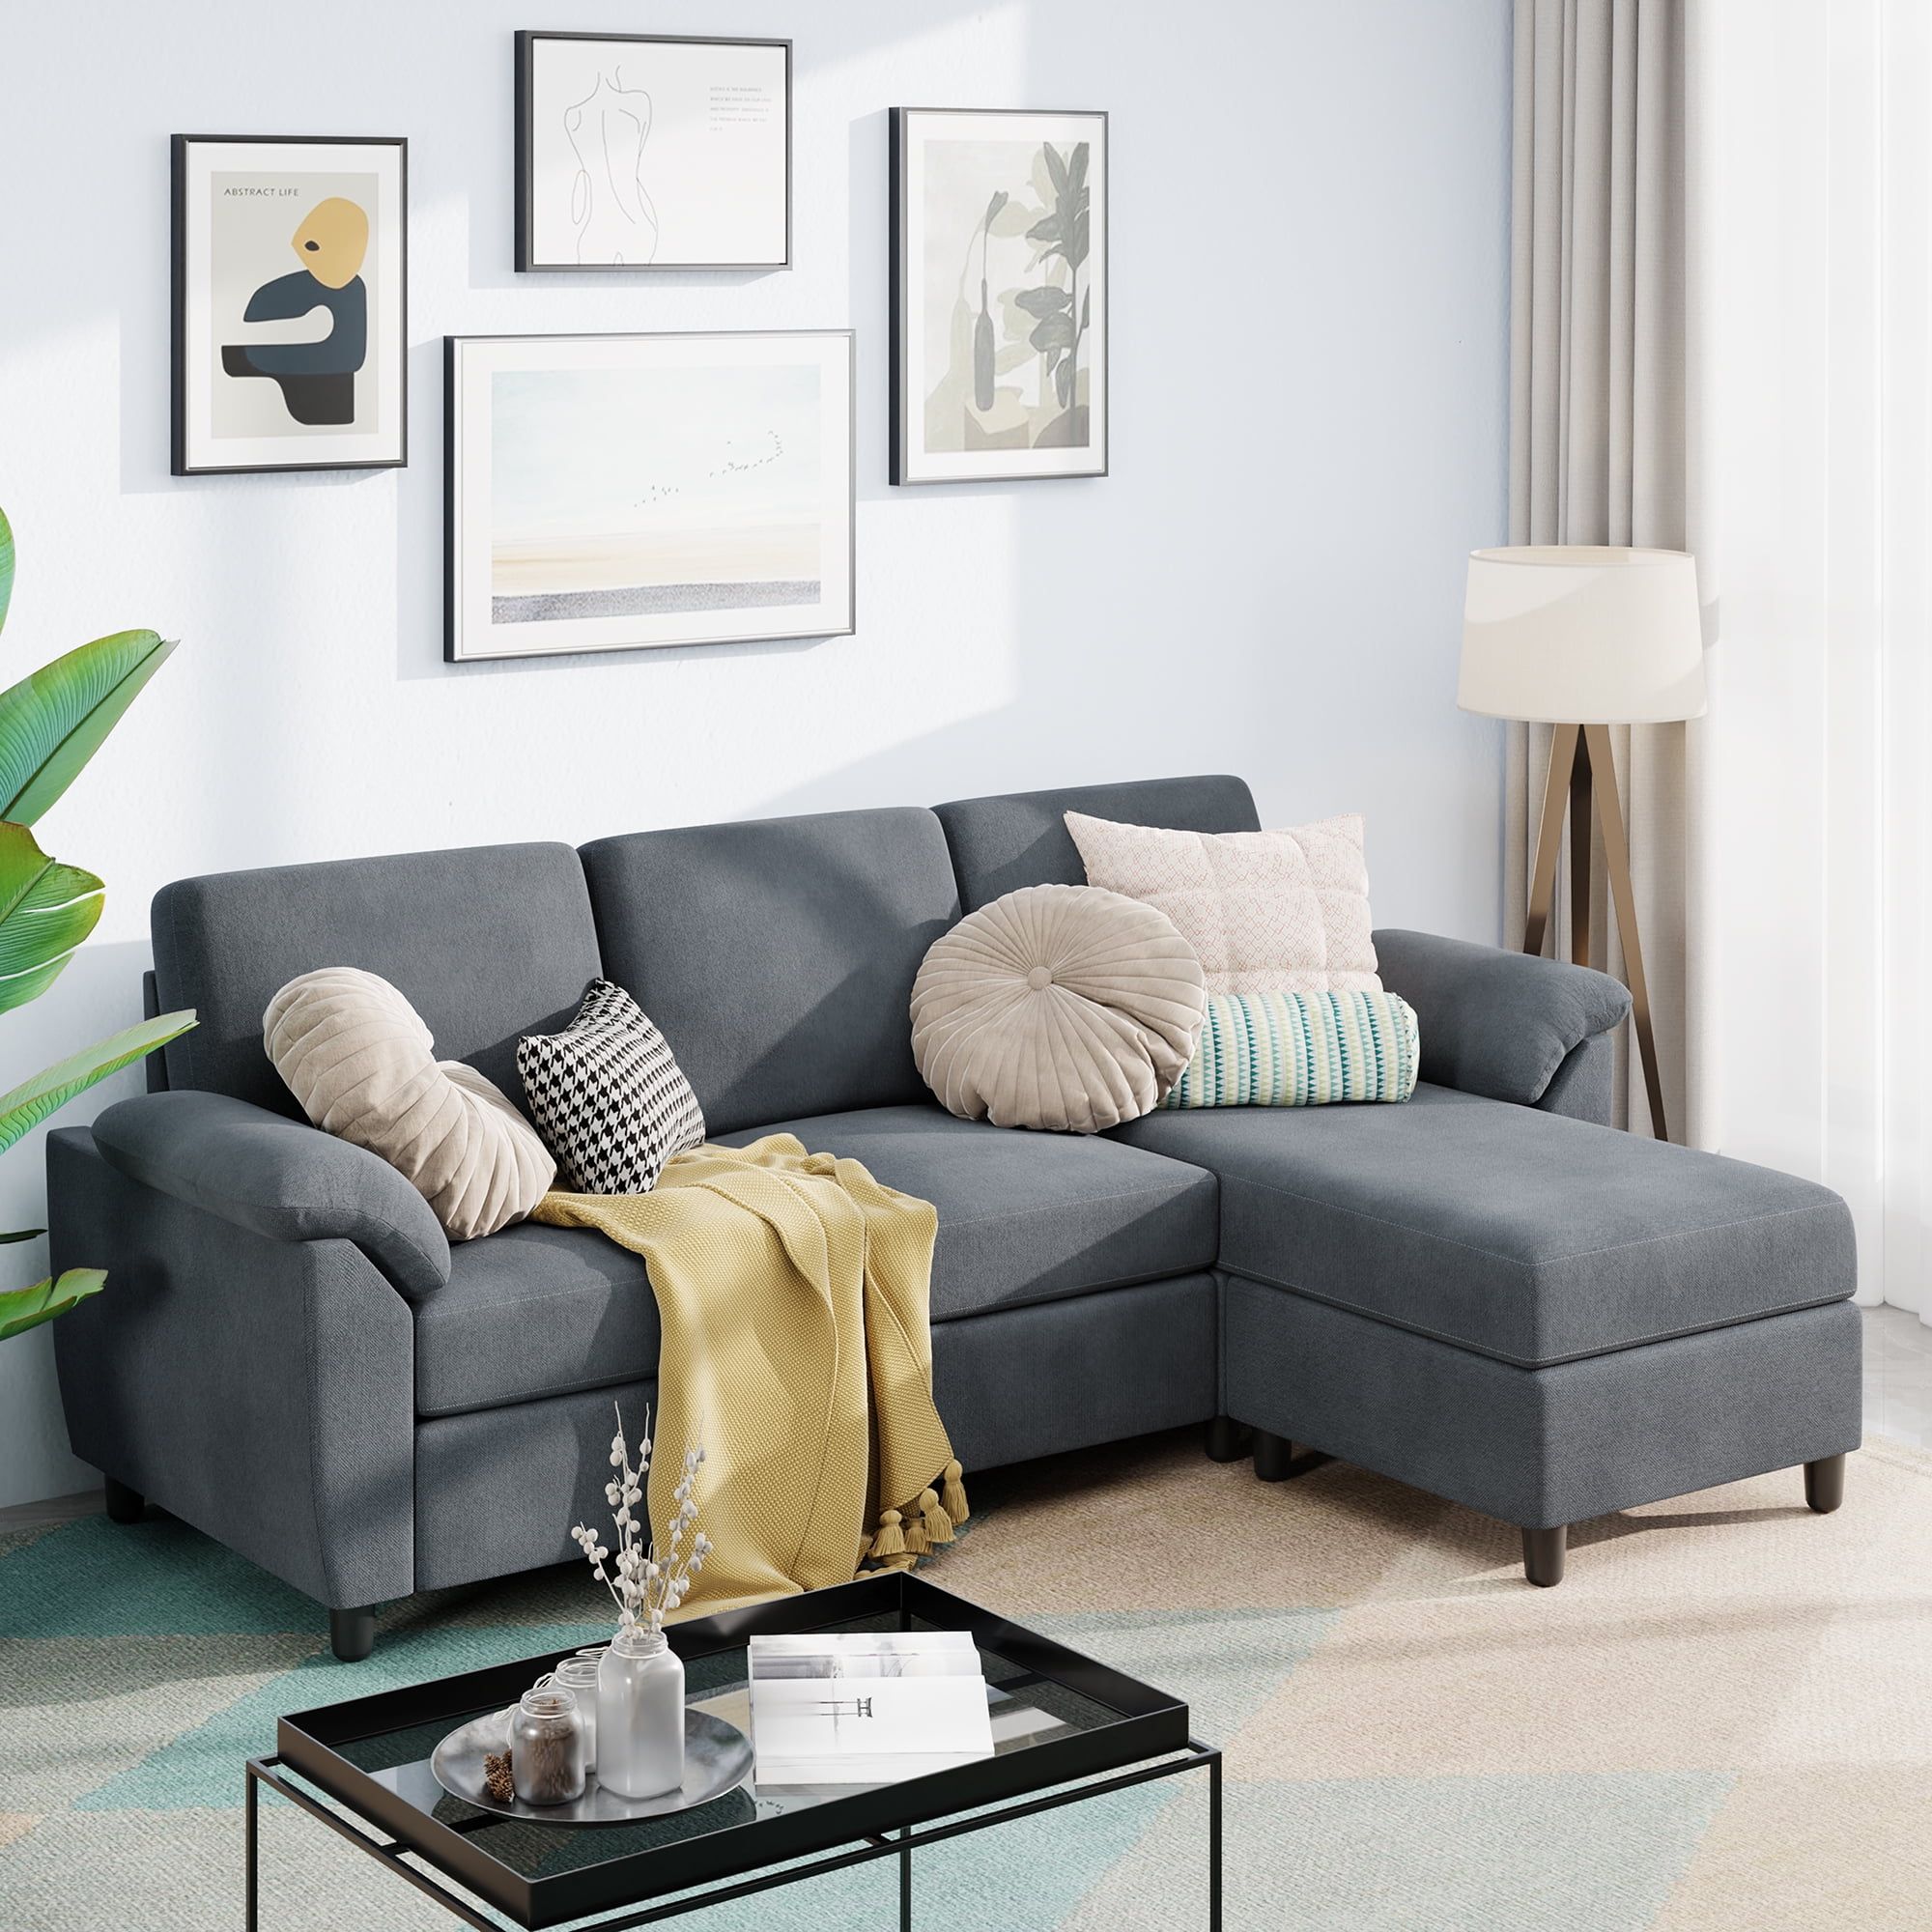 Sobaniilo 79" Convertible Sectional Sofa Couch, 3 Seat L Shaped Sofa With  Removable Pillows Linen Fabric Small Couch Mid Century For Living Room,  Apartment And Office (gray) – Walmart Intended For 3 Seat Convertible Sectional Sofas (View 5 of 15)